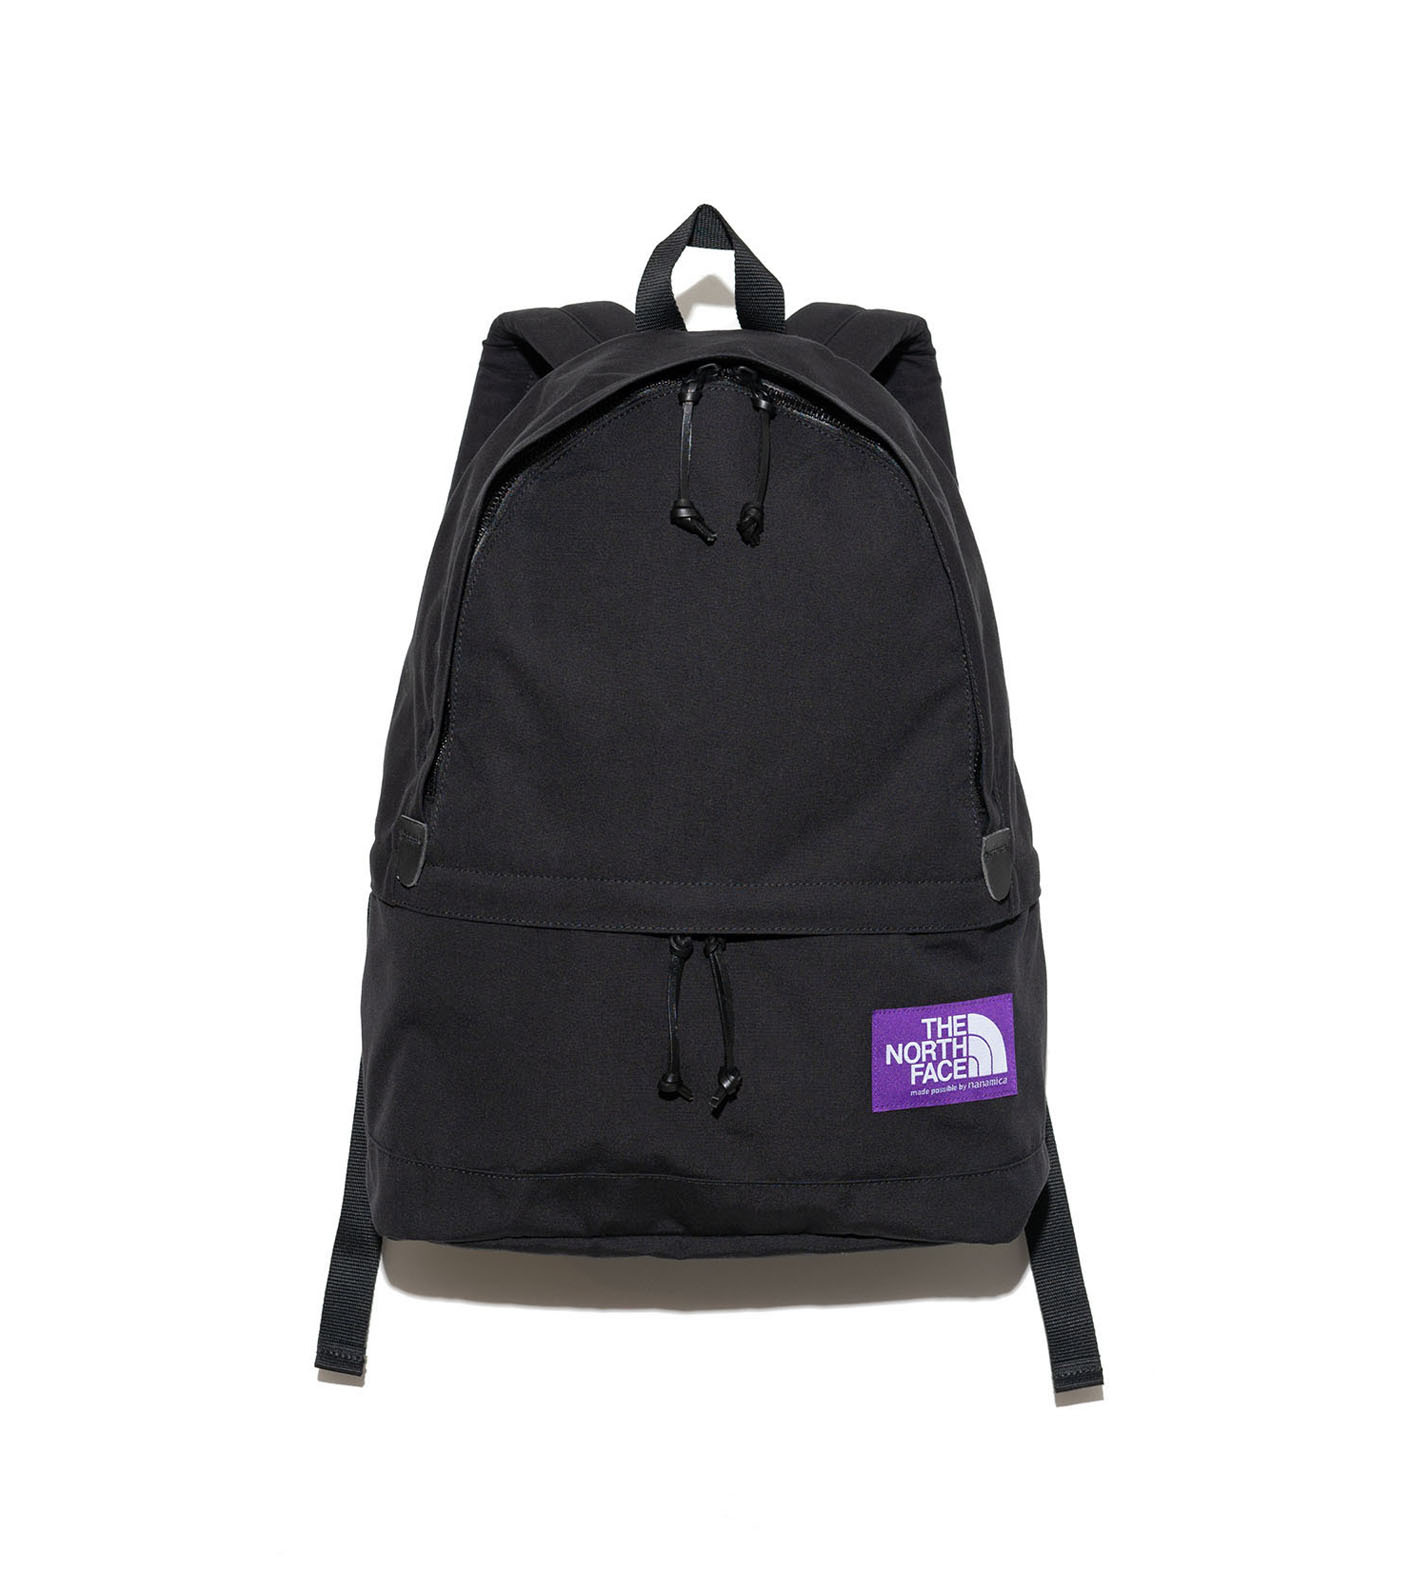 THE NORTH FACE PURPLE LABEL 日本限定紫標Field Day Pack 後背包